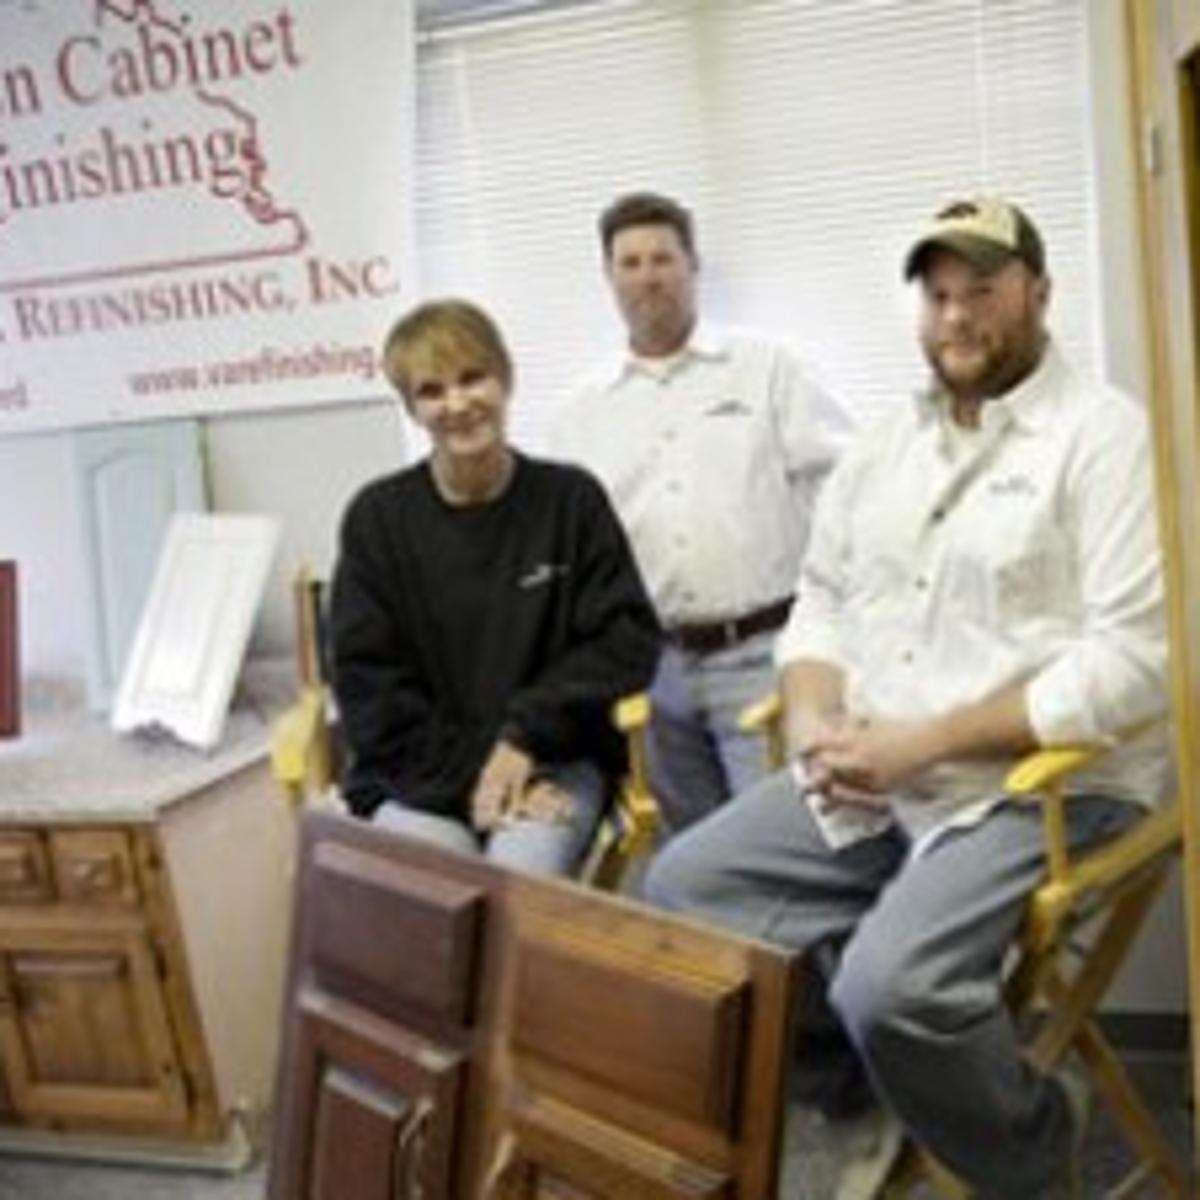 Company Concentrates On Cabinet Refinishing Business Business